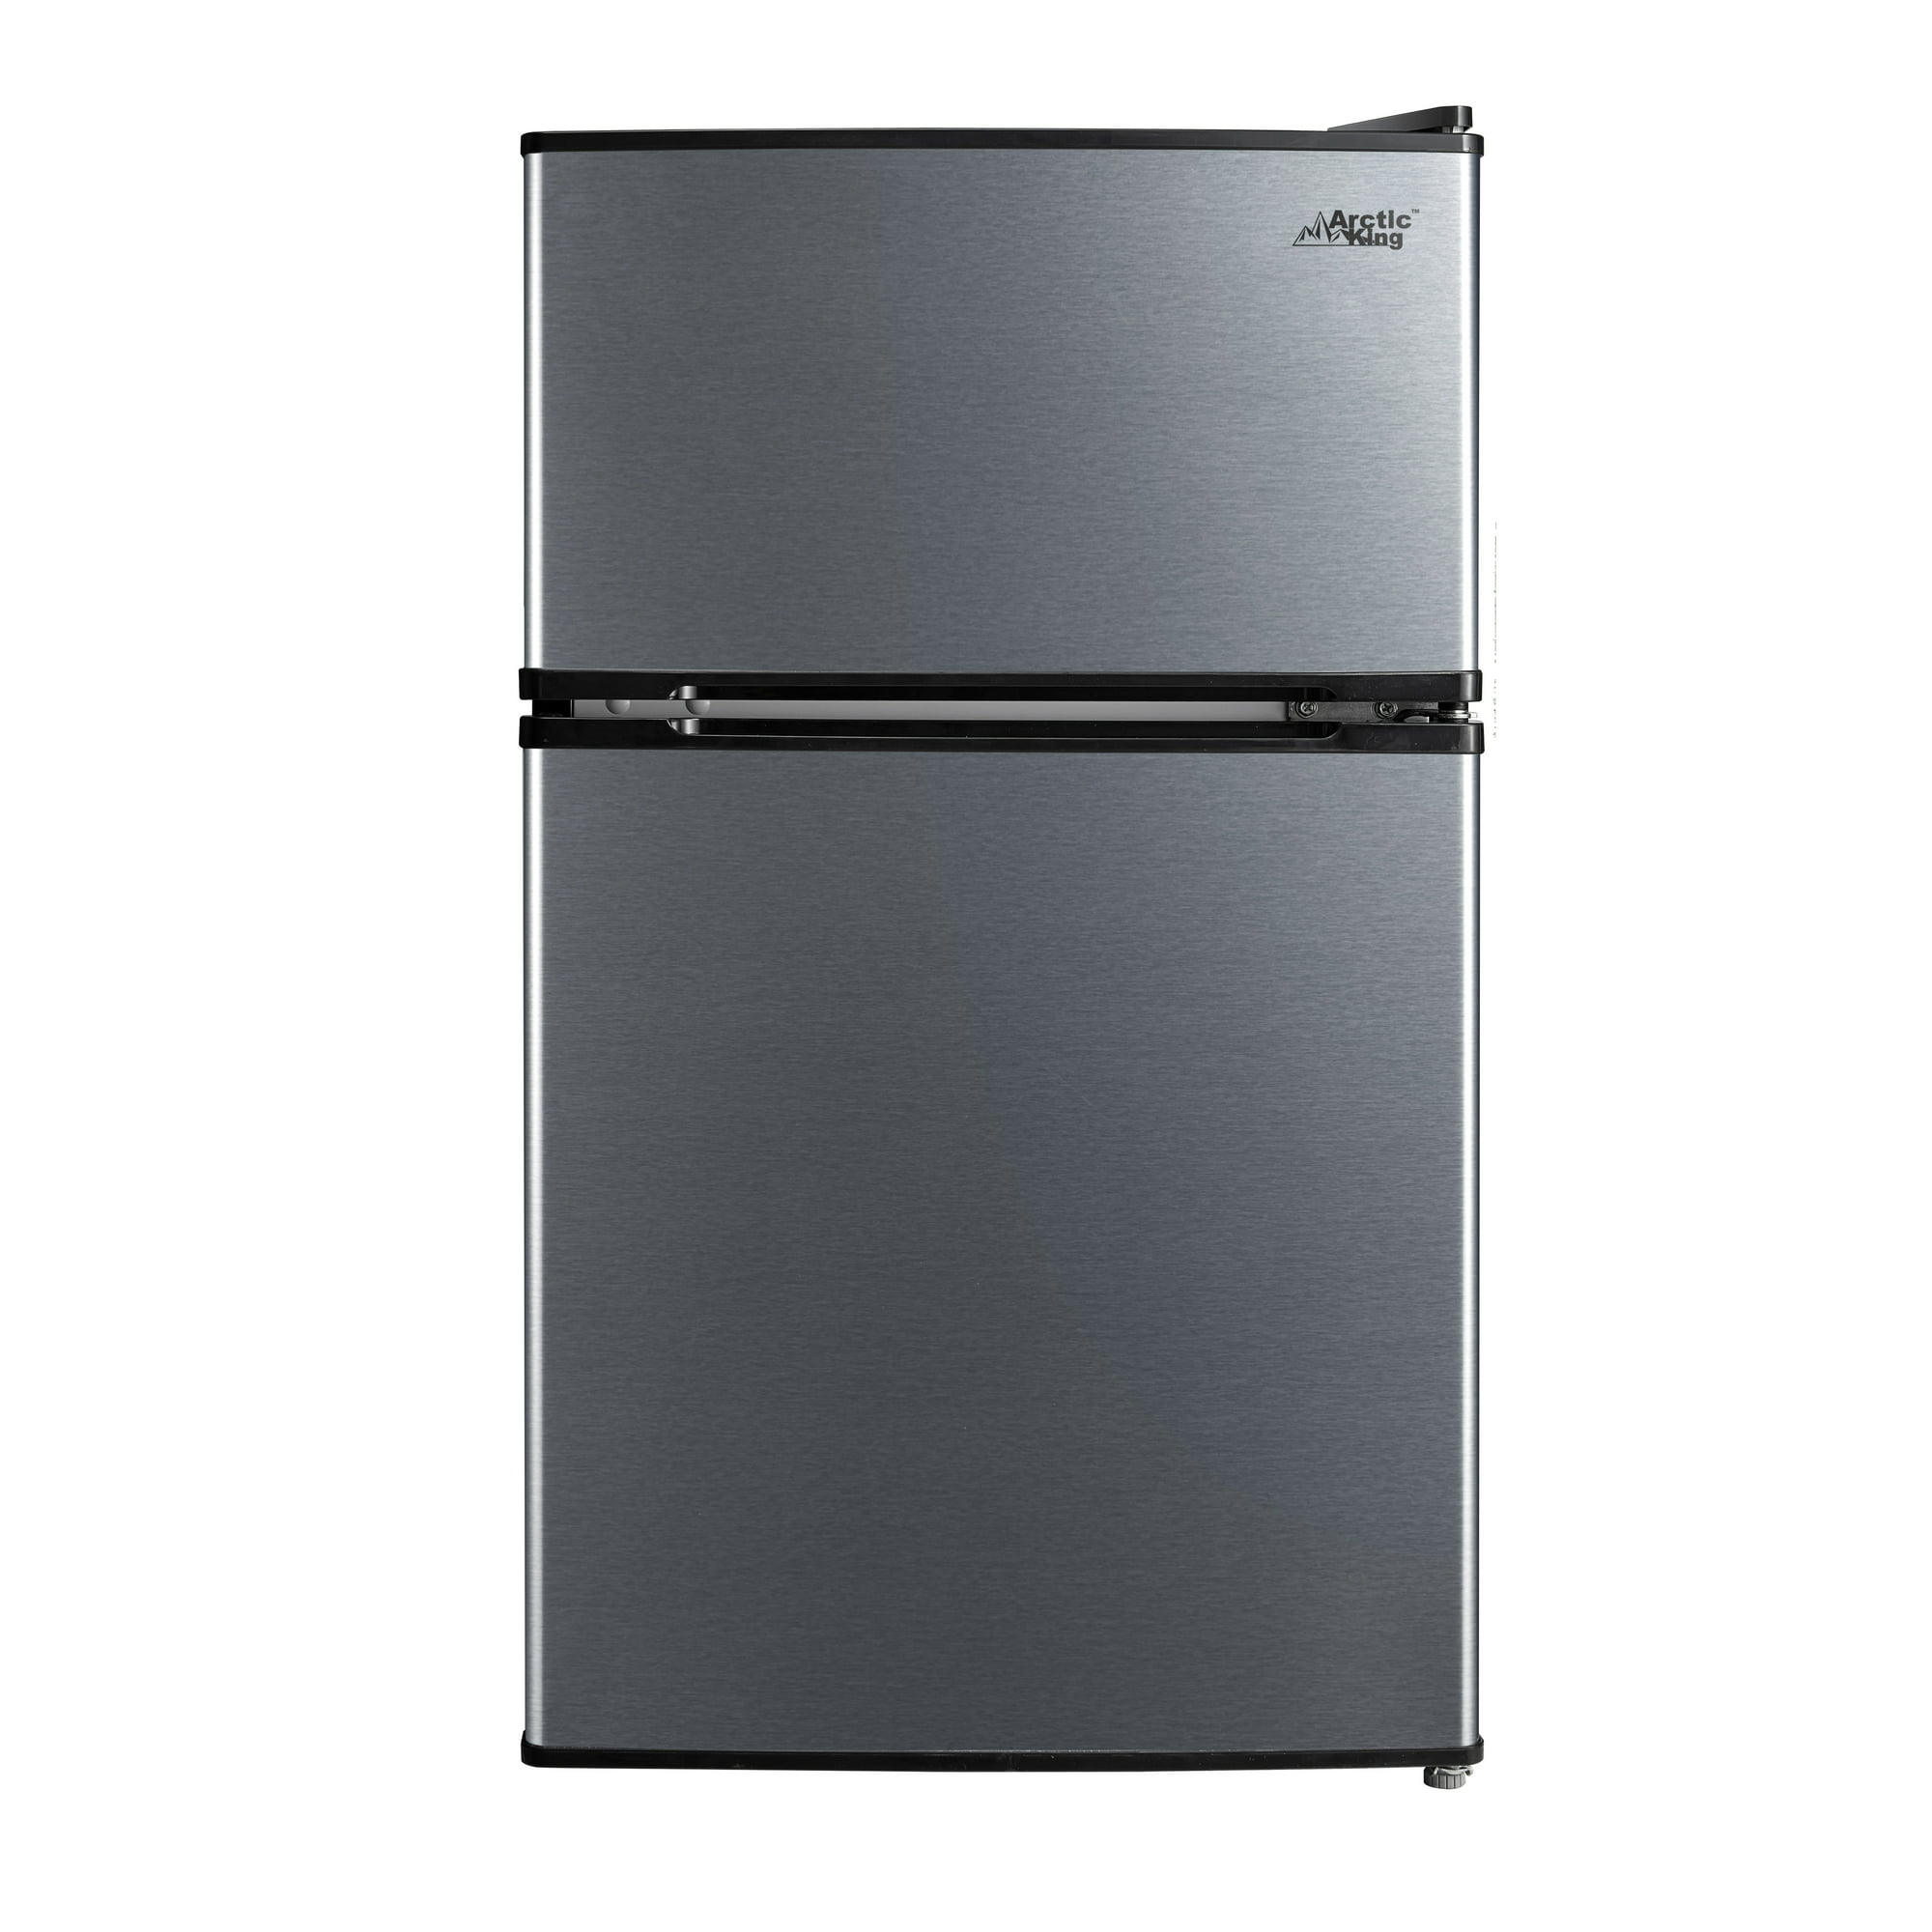 3.2-Cu Ft Arctic King Two Door Compact Refrigerator w/ Freezer (Stainless Steel, Black) $129 + Free Shipping